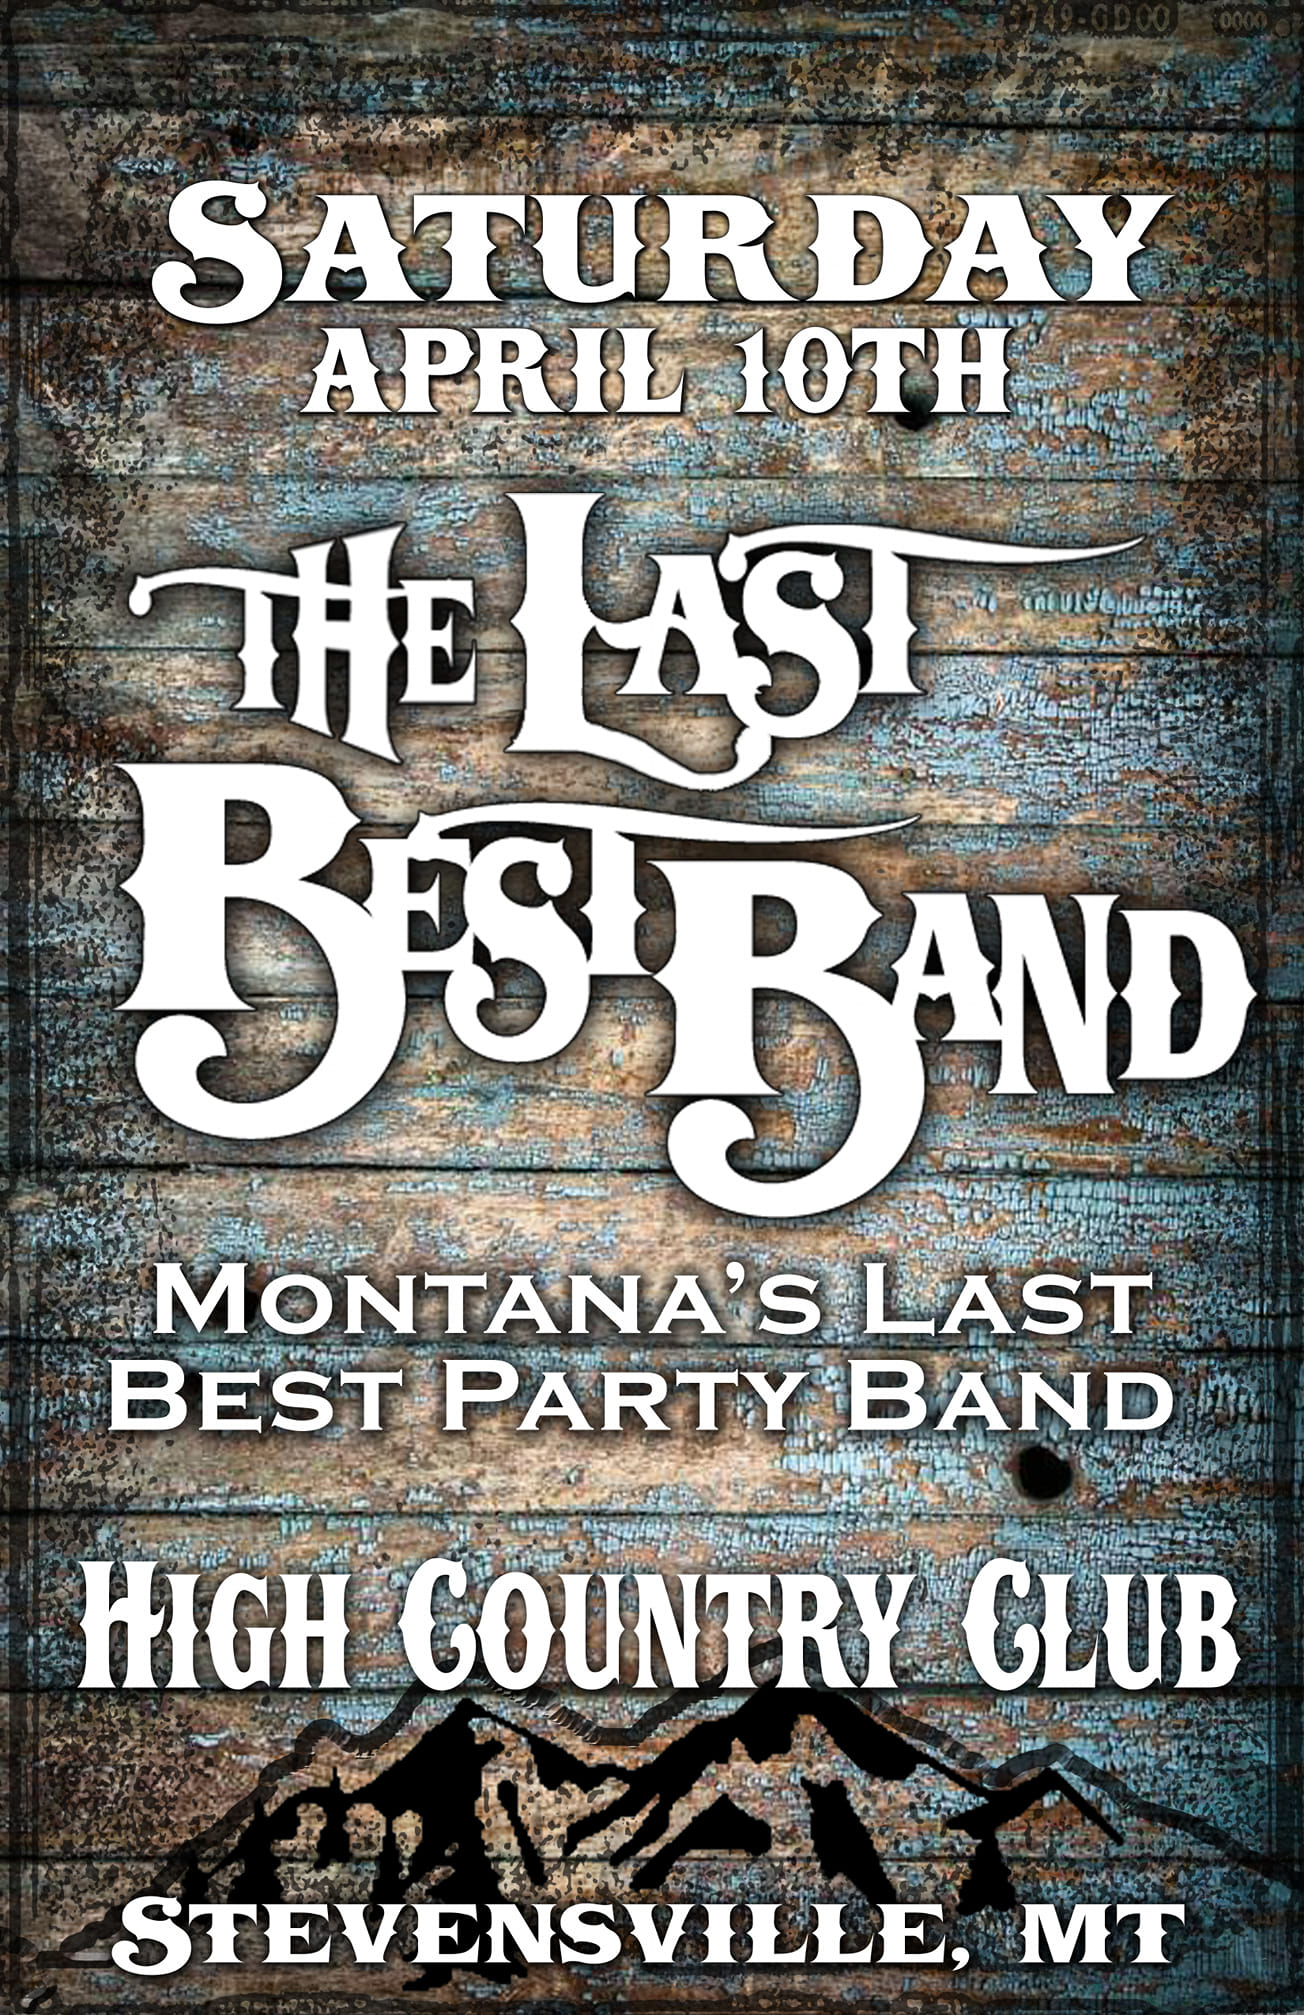 The Last Best Band at High Country Club in Stevensville MT